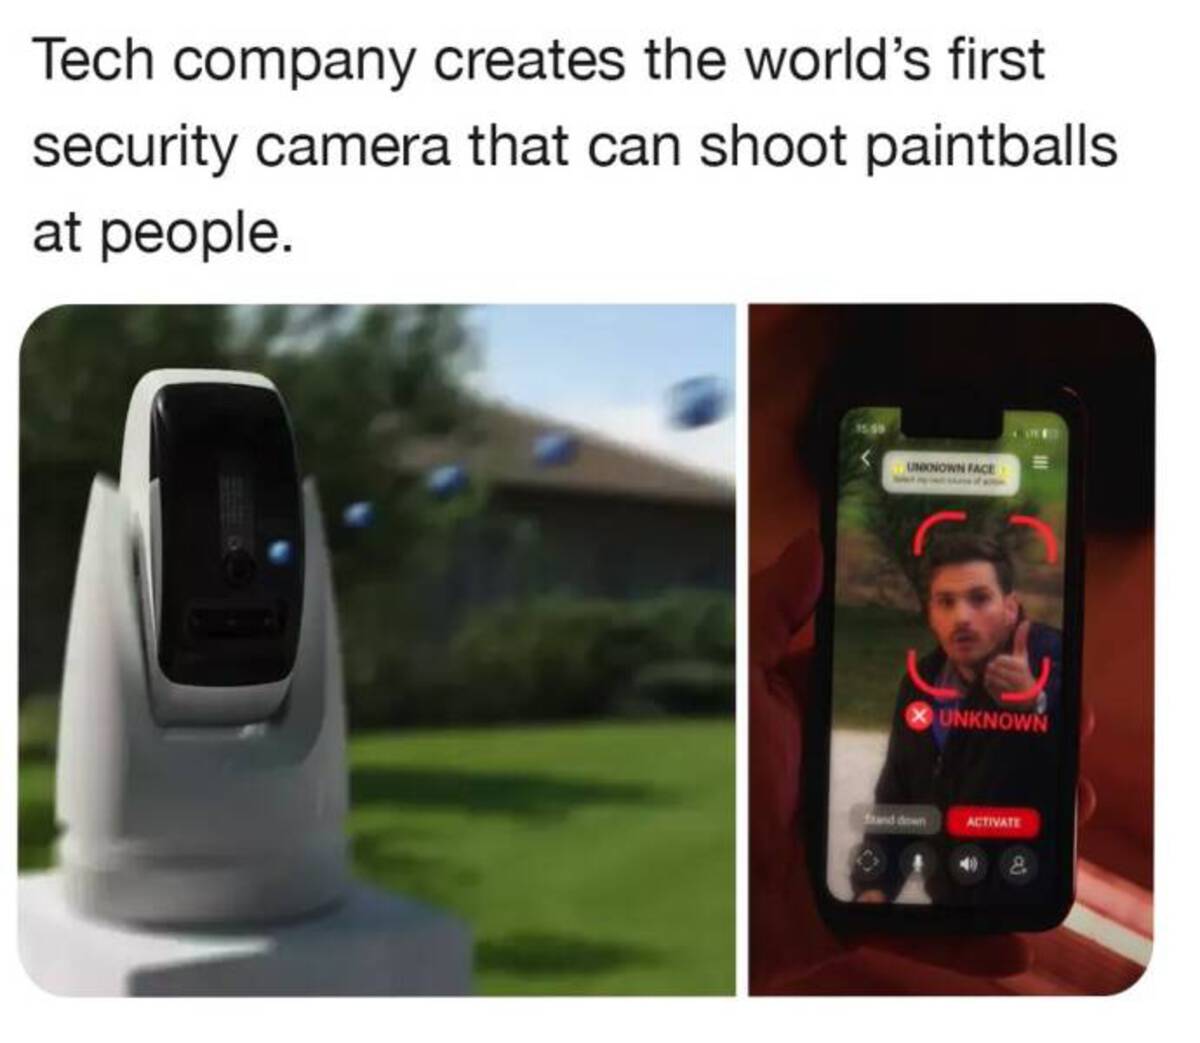 paintcam eve - Tech company creates the world's first security camera that can shoot paintballs at people. Unonown Face Unknown found down Activate